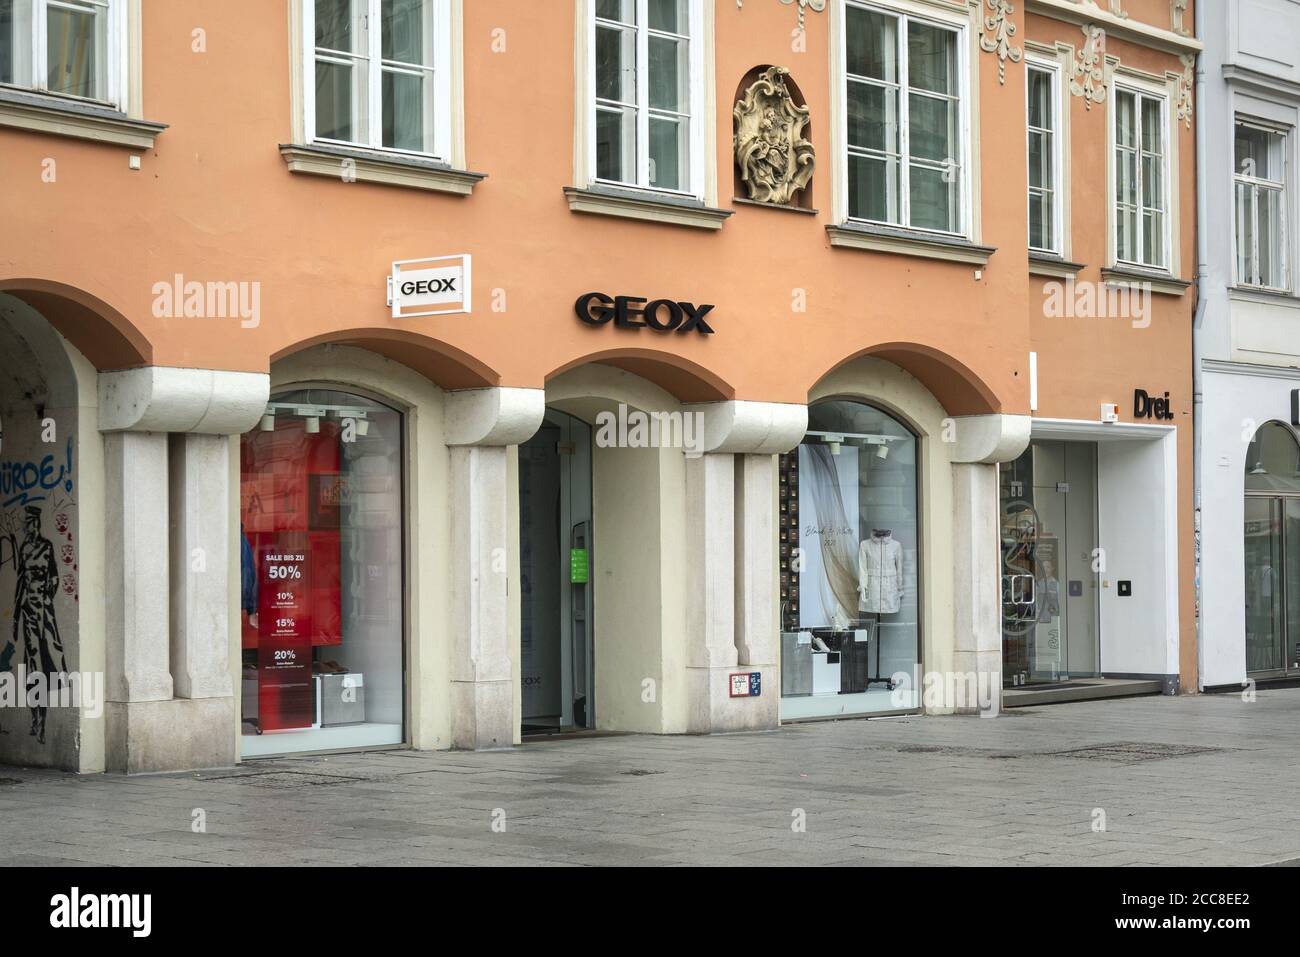 Graz, Austria. August 2020. The external view of the Geox brand shop  windows in the city center Stock Photo - Alamy